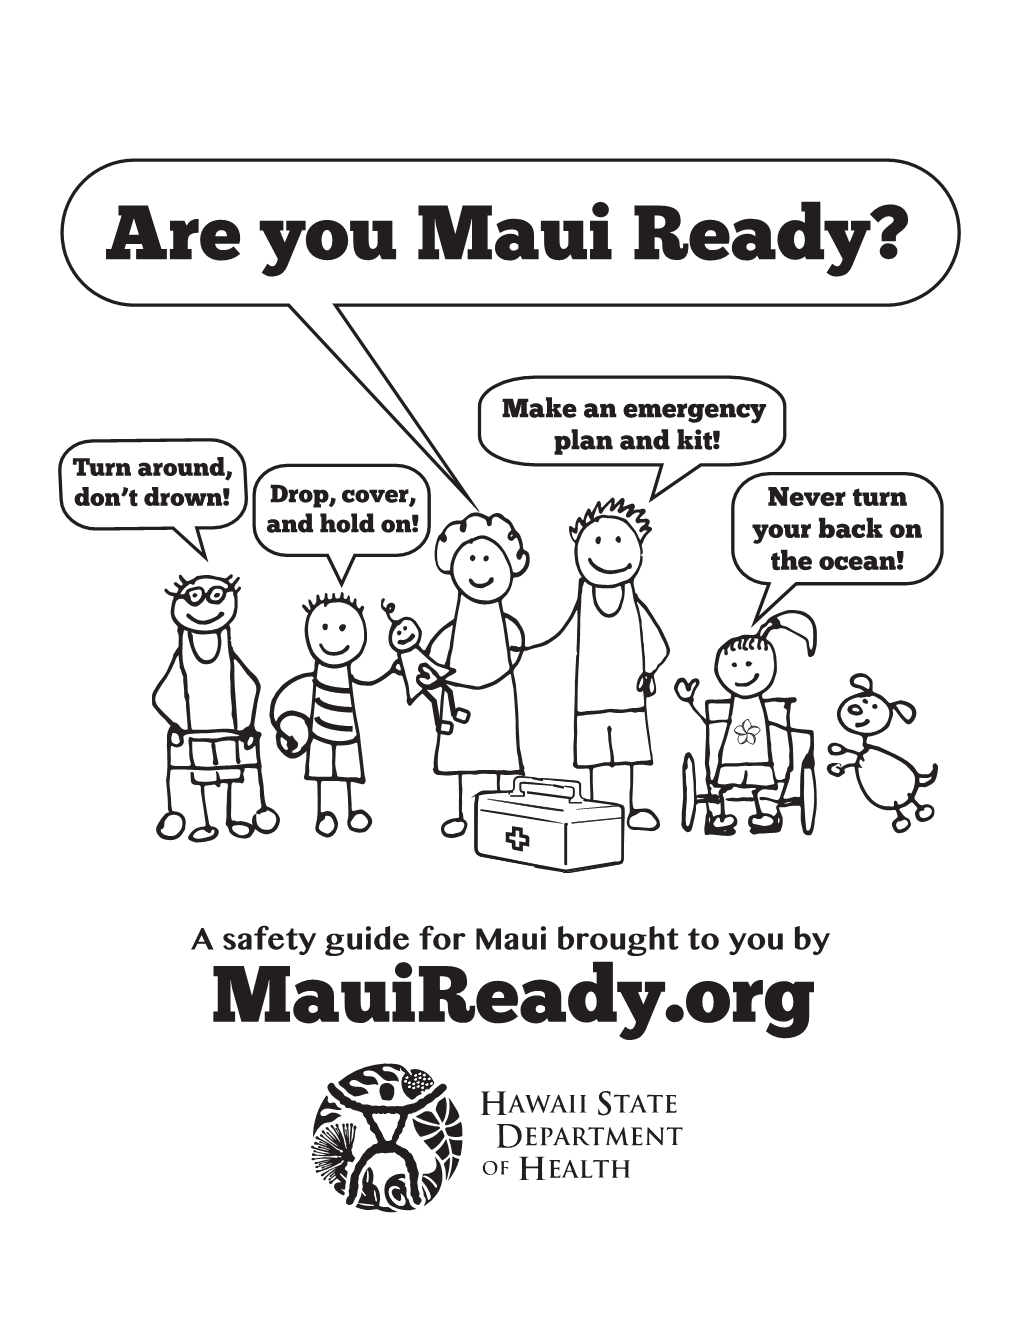 Mauiready.Org Know What to Do in an Emergency Make a Plan with Your Family in Case of a Natural Disaster Or Other Emergency